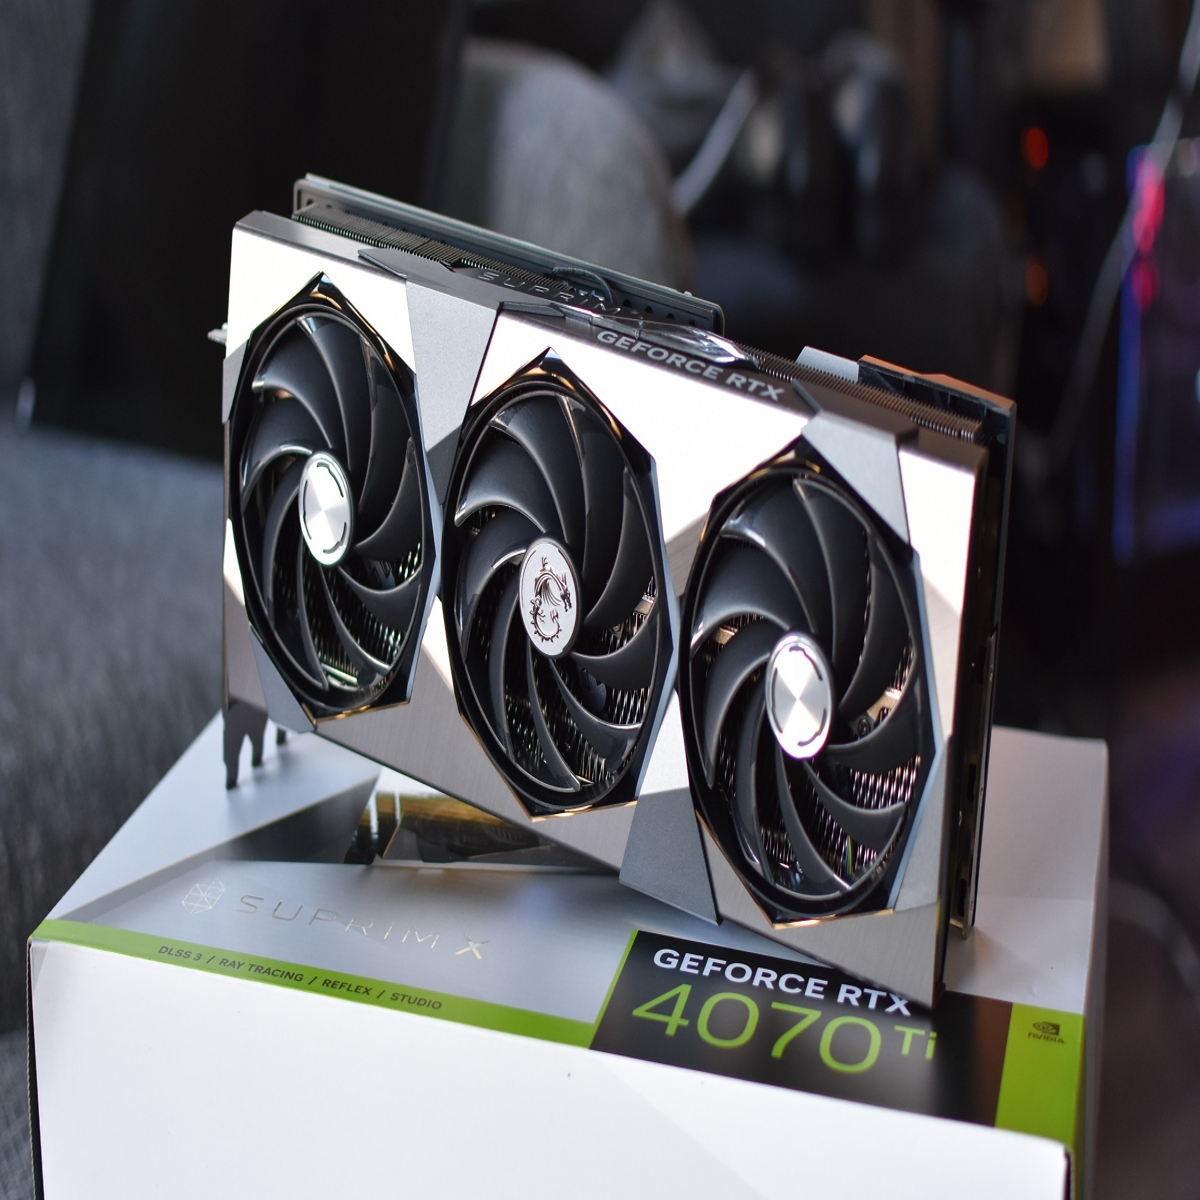 New MSI graphics card coolers show possible RTX 4090 Ti design